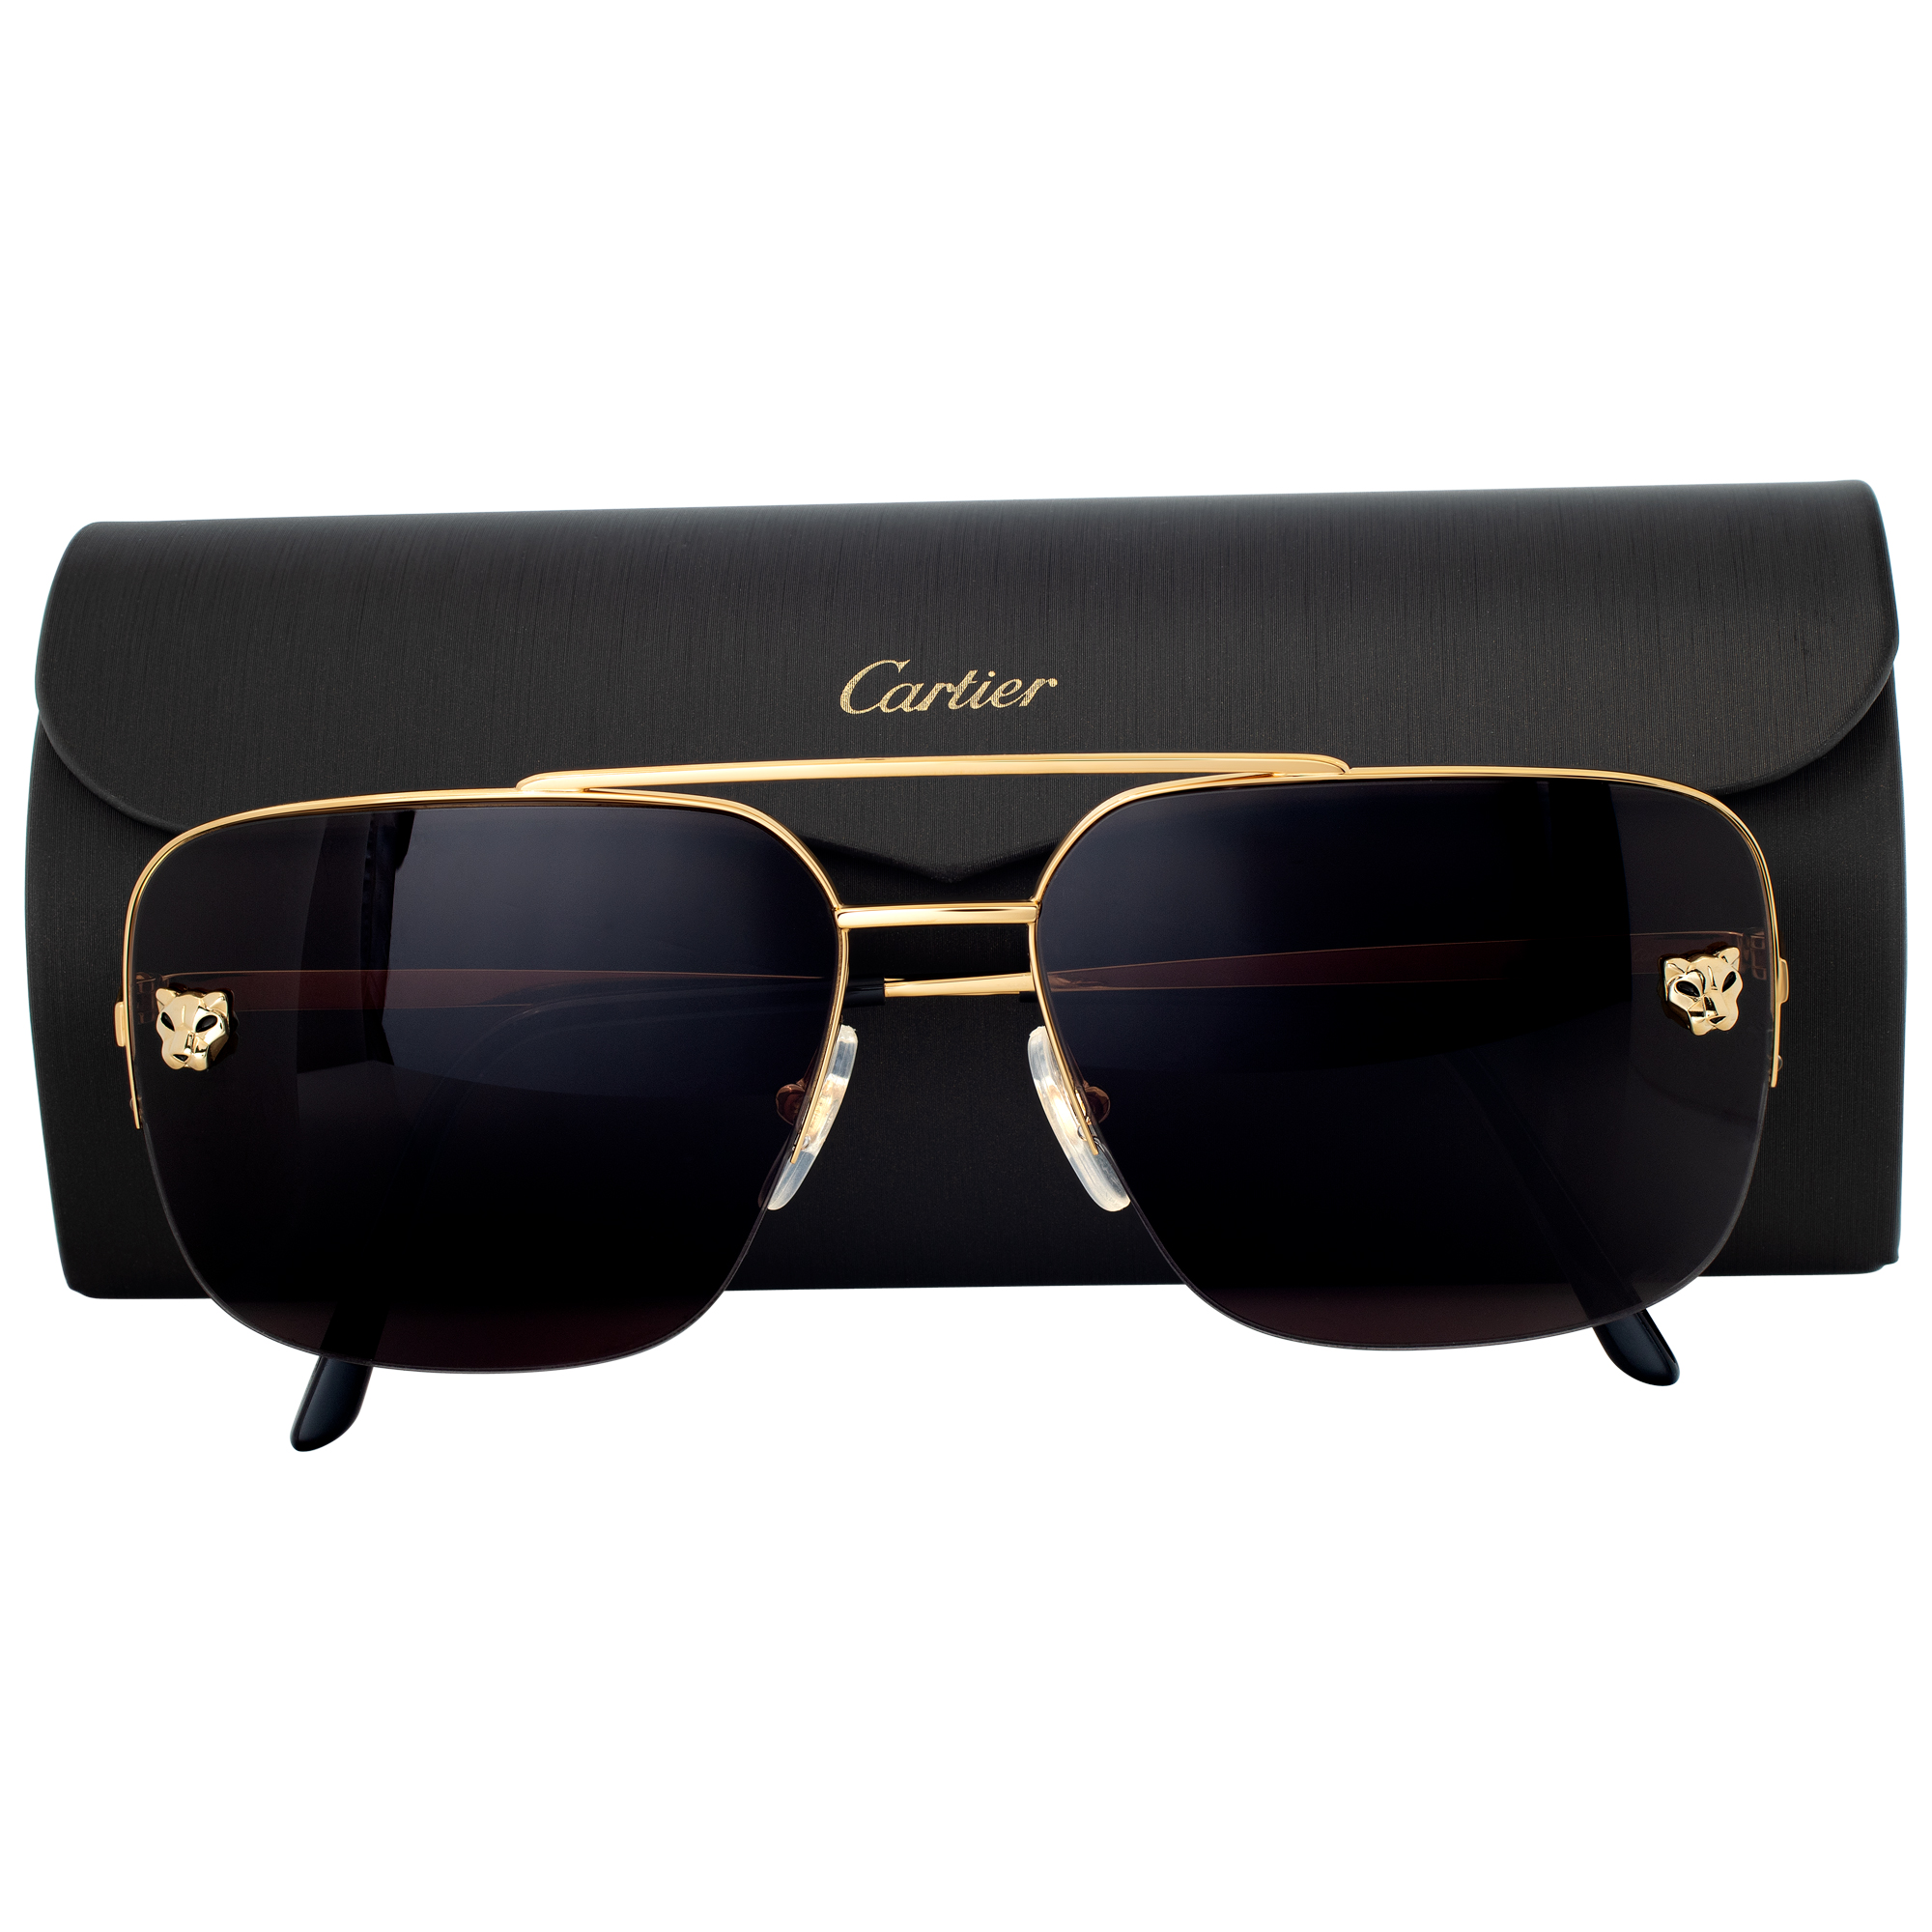 Cartier Panthere sunglasses image 2